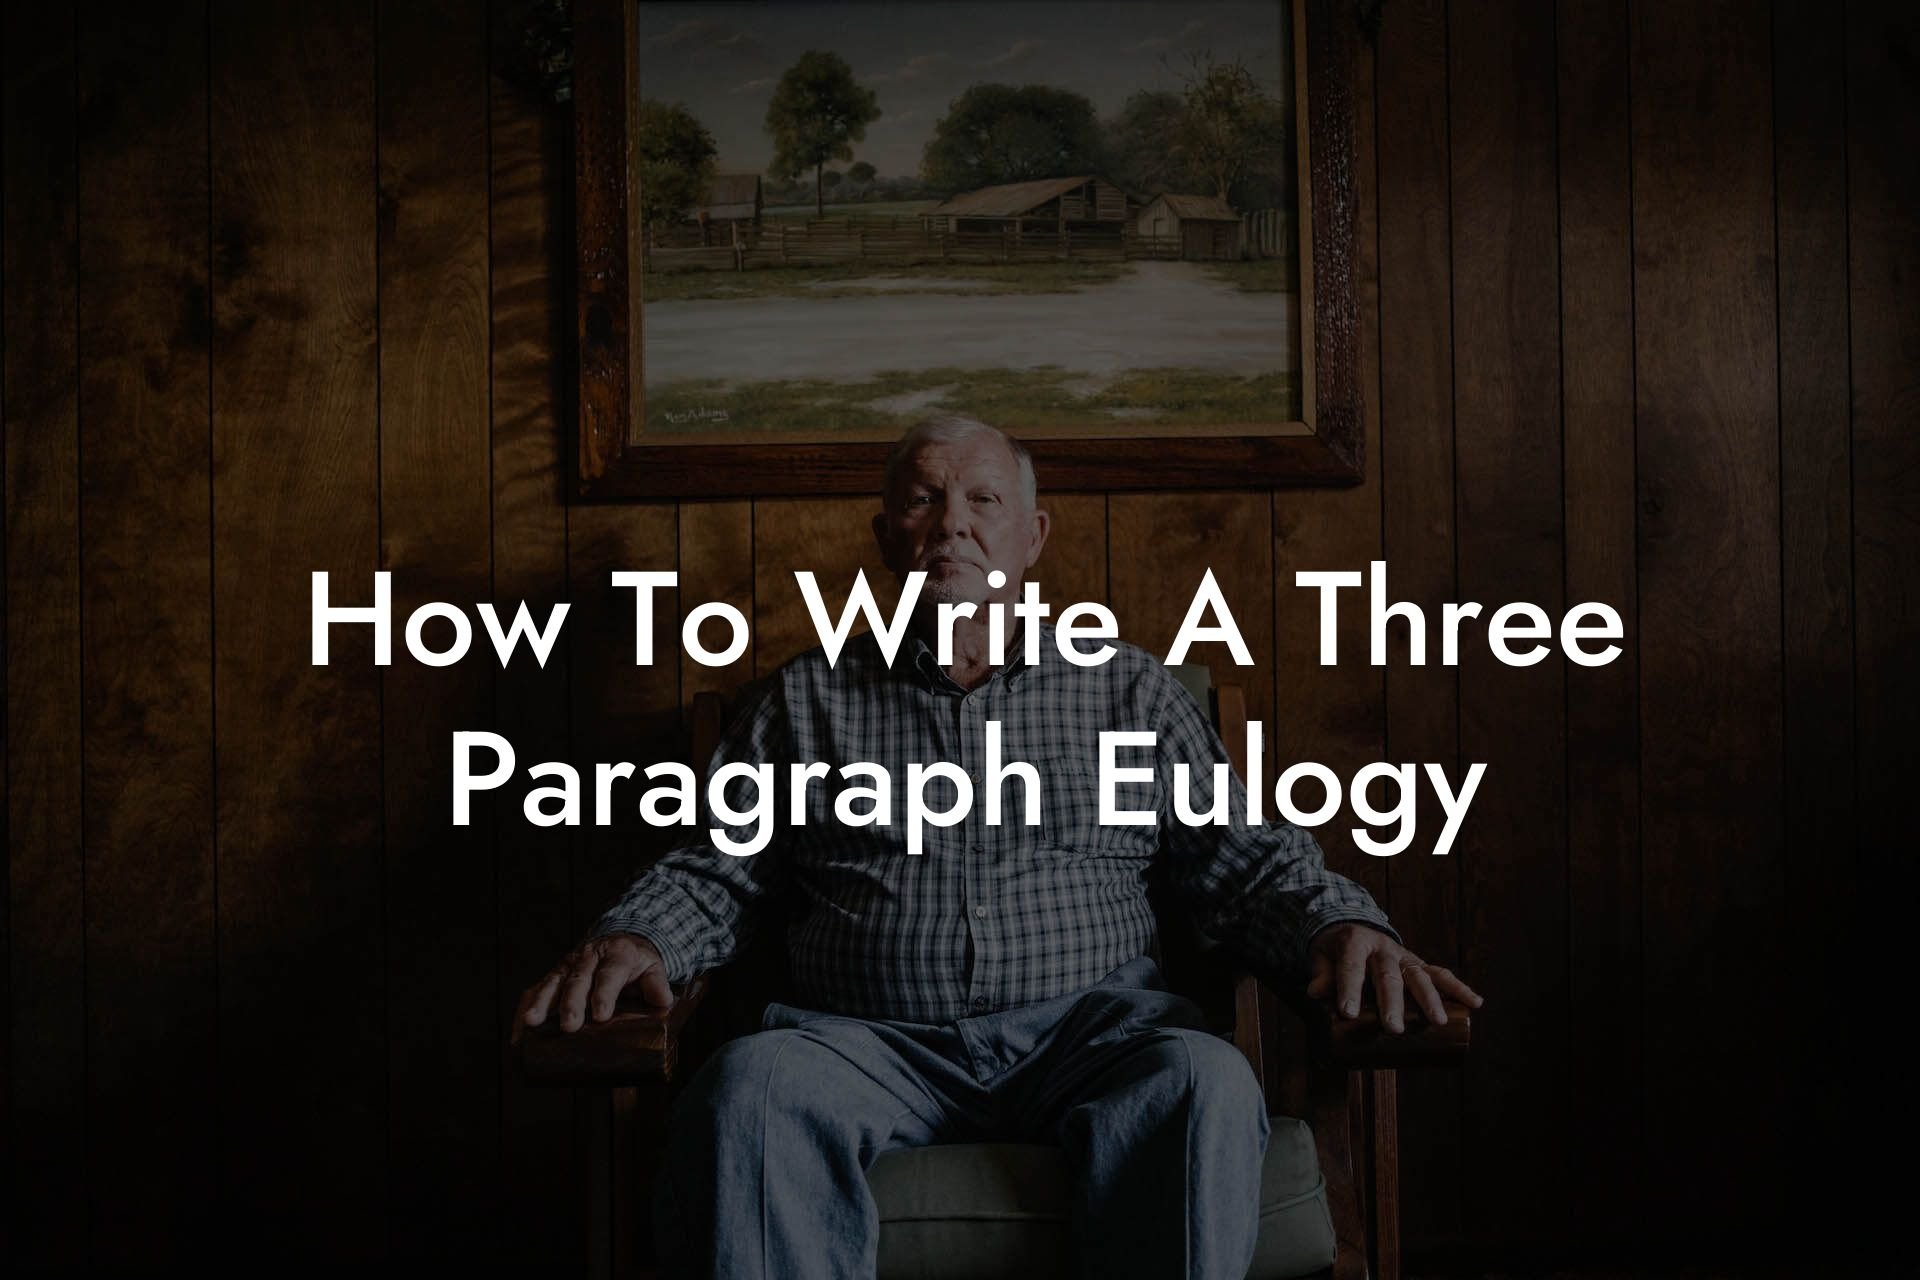 How To Write A Three Paragraph Eulogy